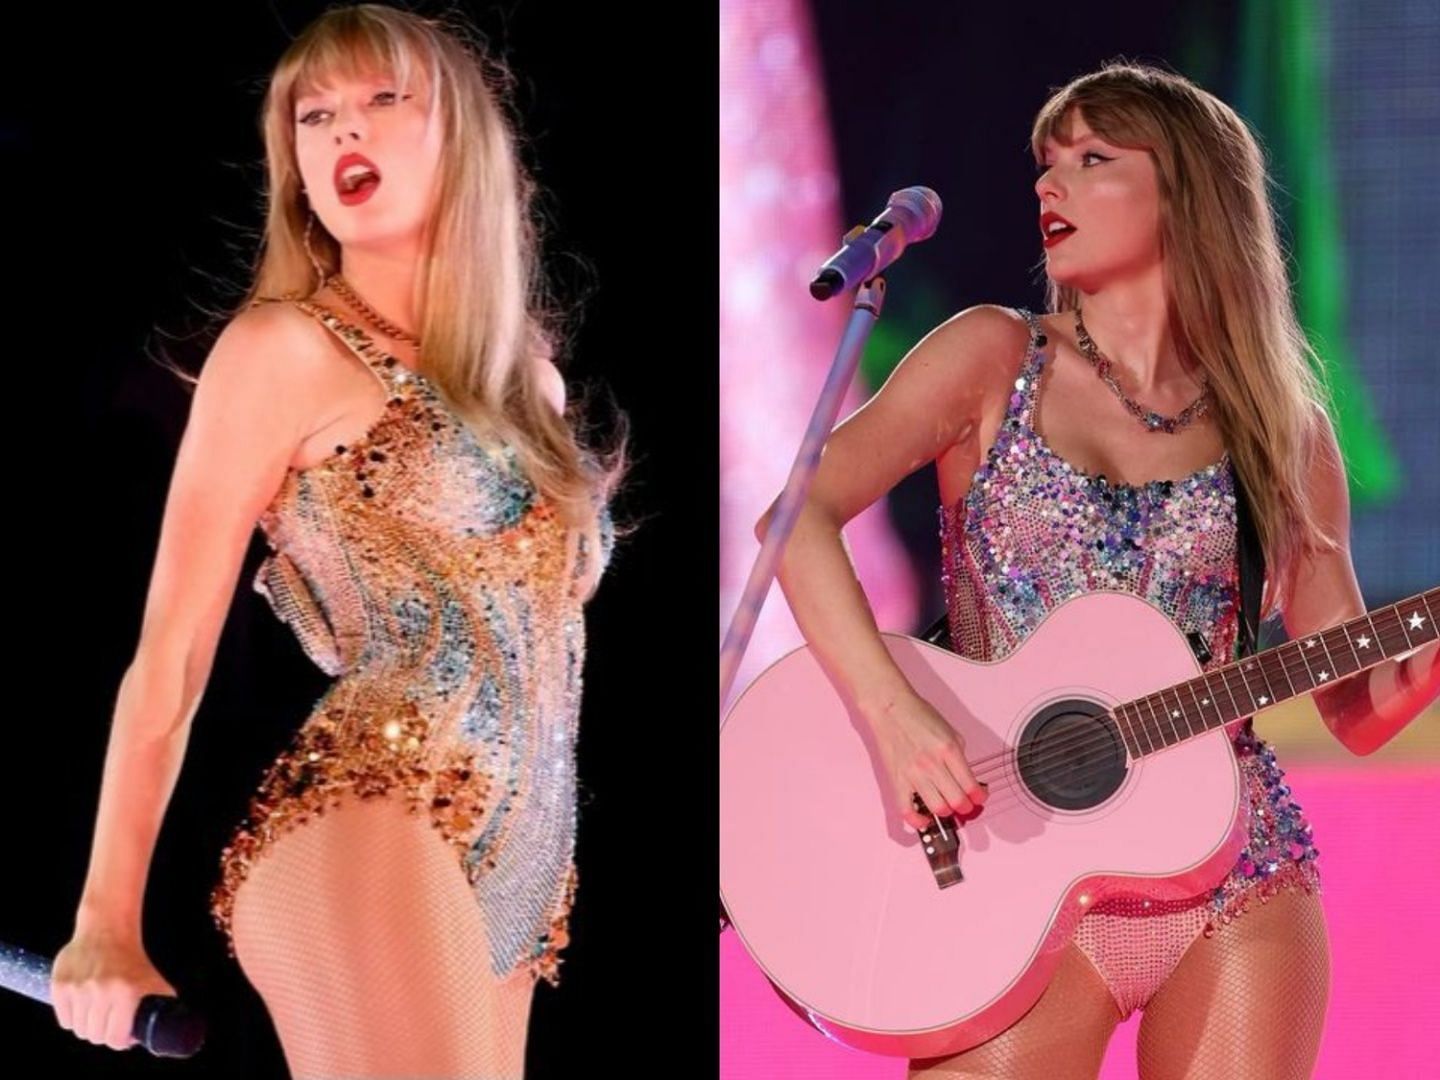 Taylor Swift weight gain and body positivity is inspirational (Image via Instagram/TaylorSwift)